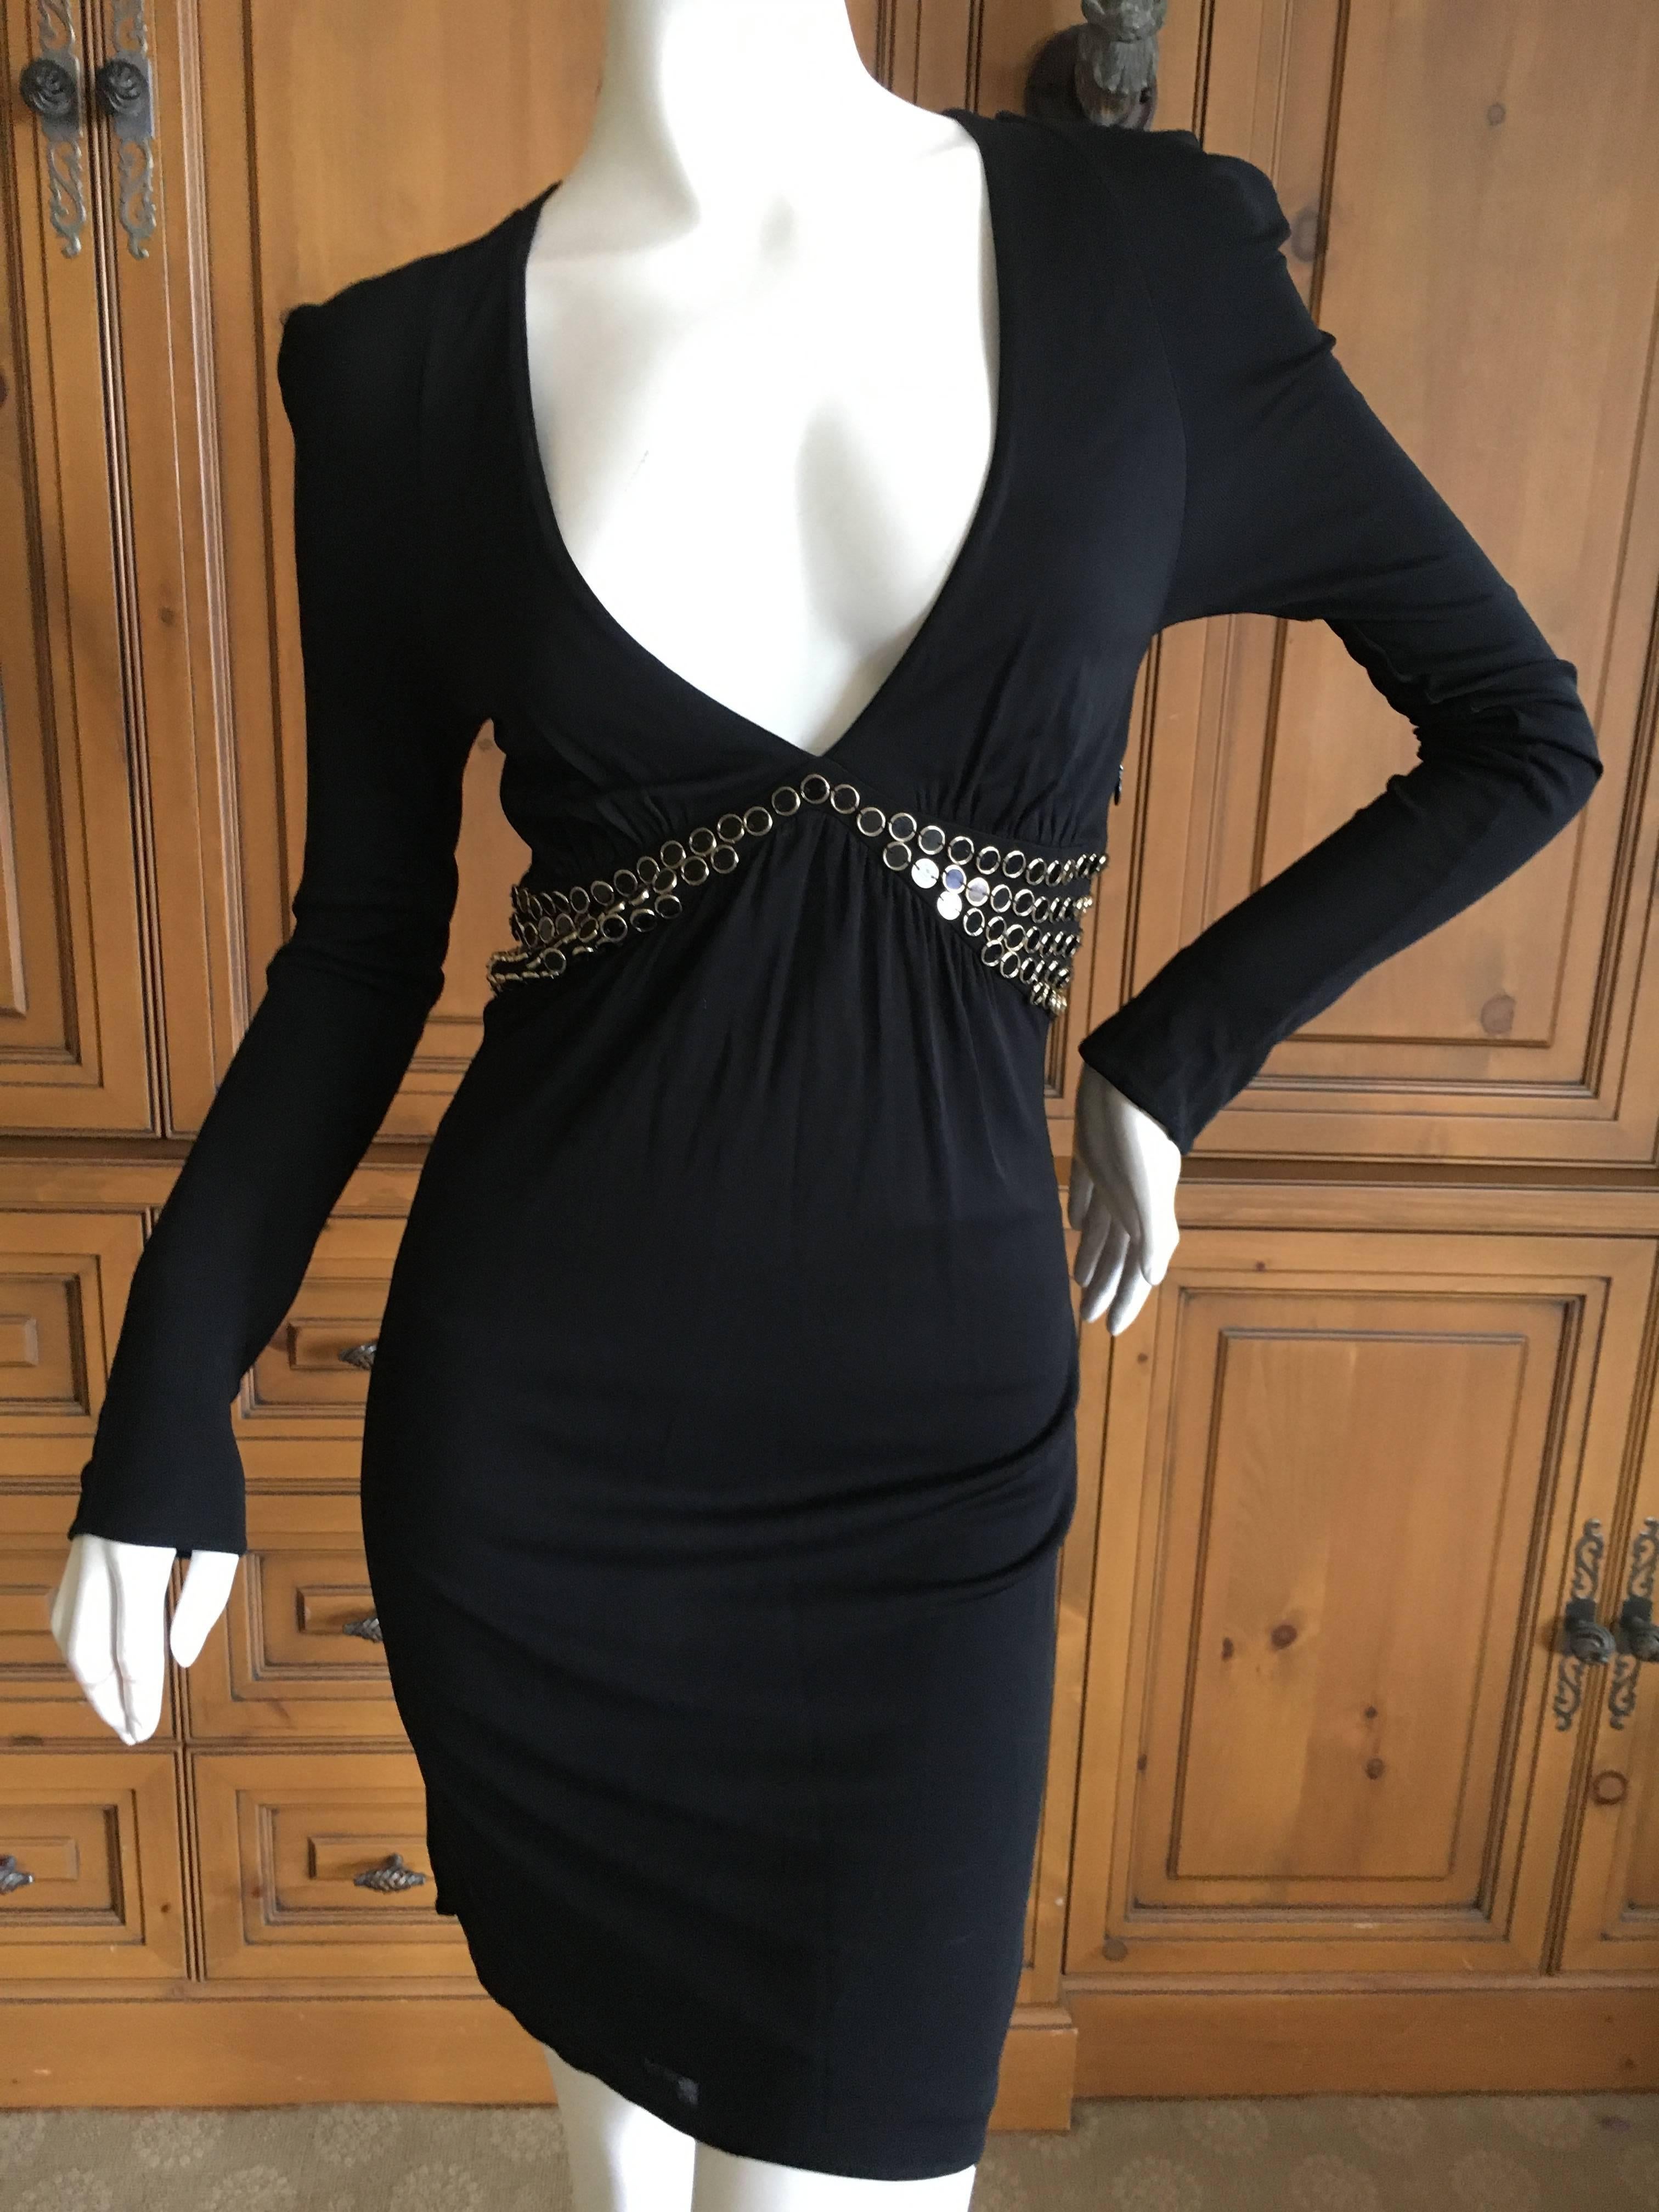 Gucci Low Cut Embellished Little Black Dress by Tom Ford.
This is so much prettier in person. 
The jewels at the belt line are glass jet set in gold bezels, so there is some weight to this.
Size L.
Bust 38'
Waist 28